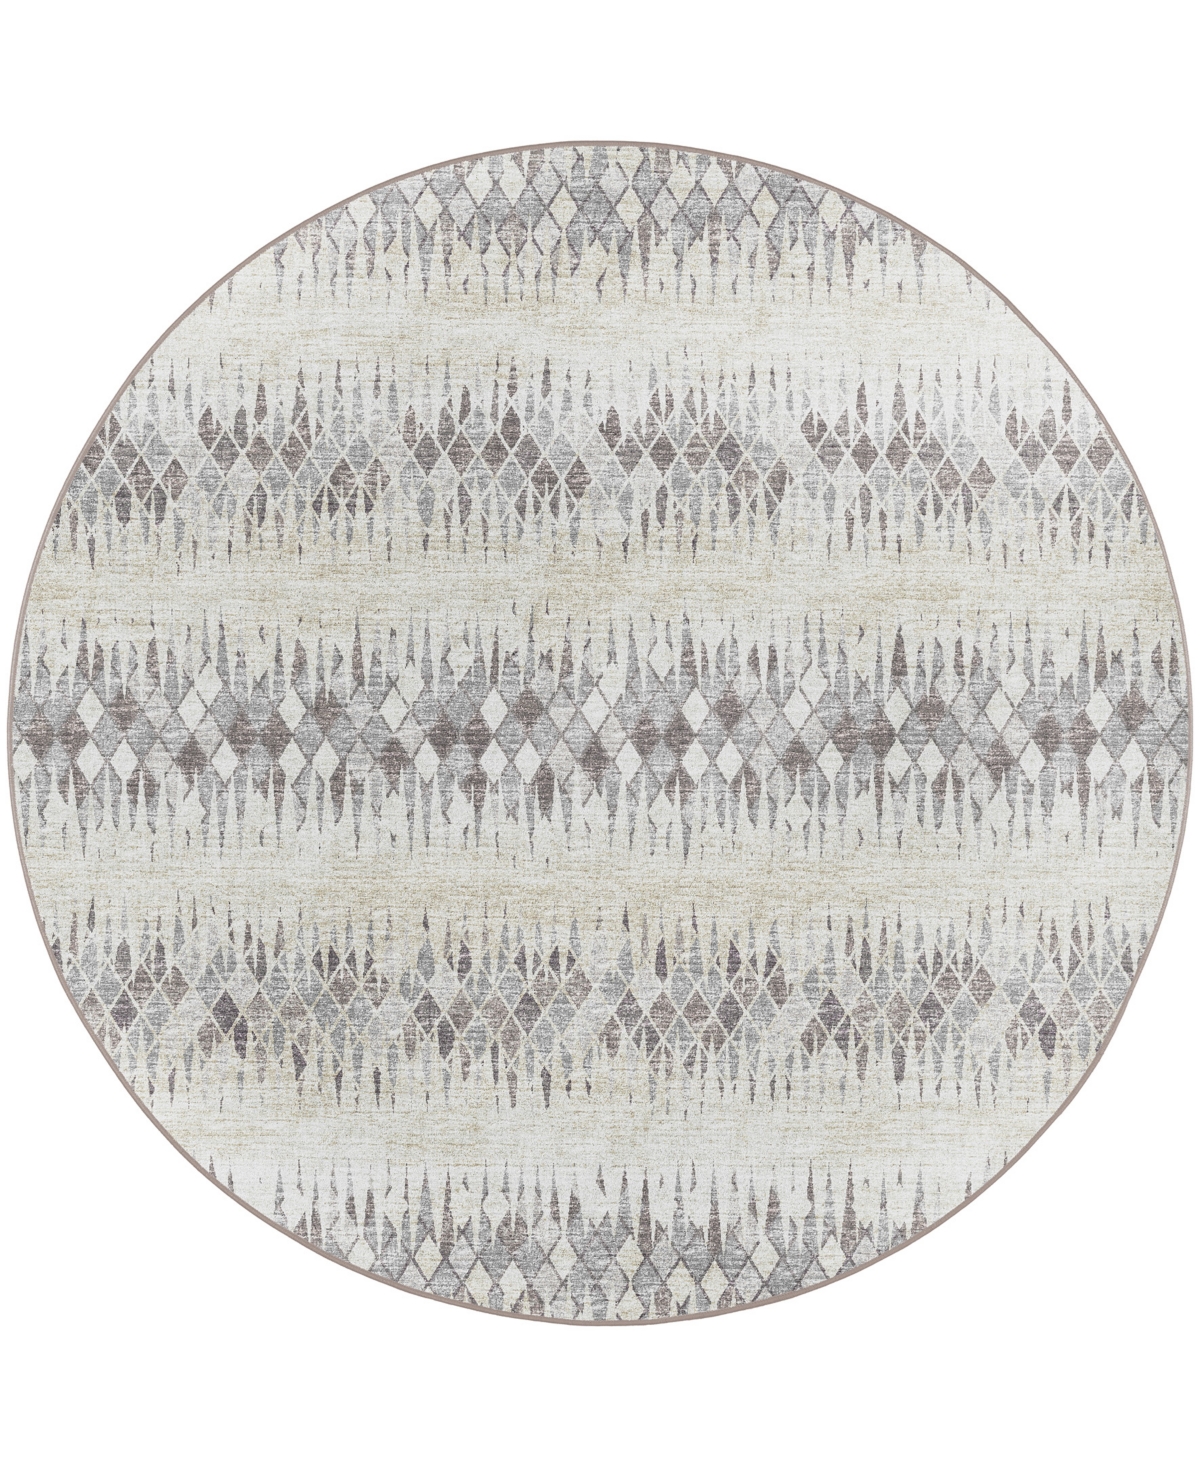 D Style Briggs Brg-5 10' x 10' Round Area Rug - Ivory